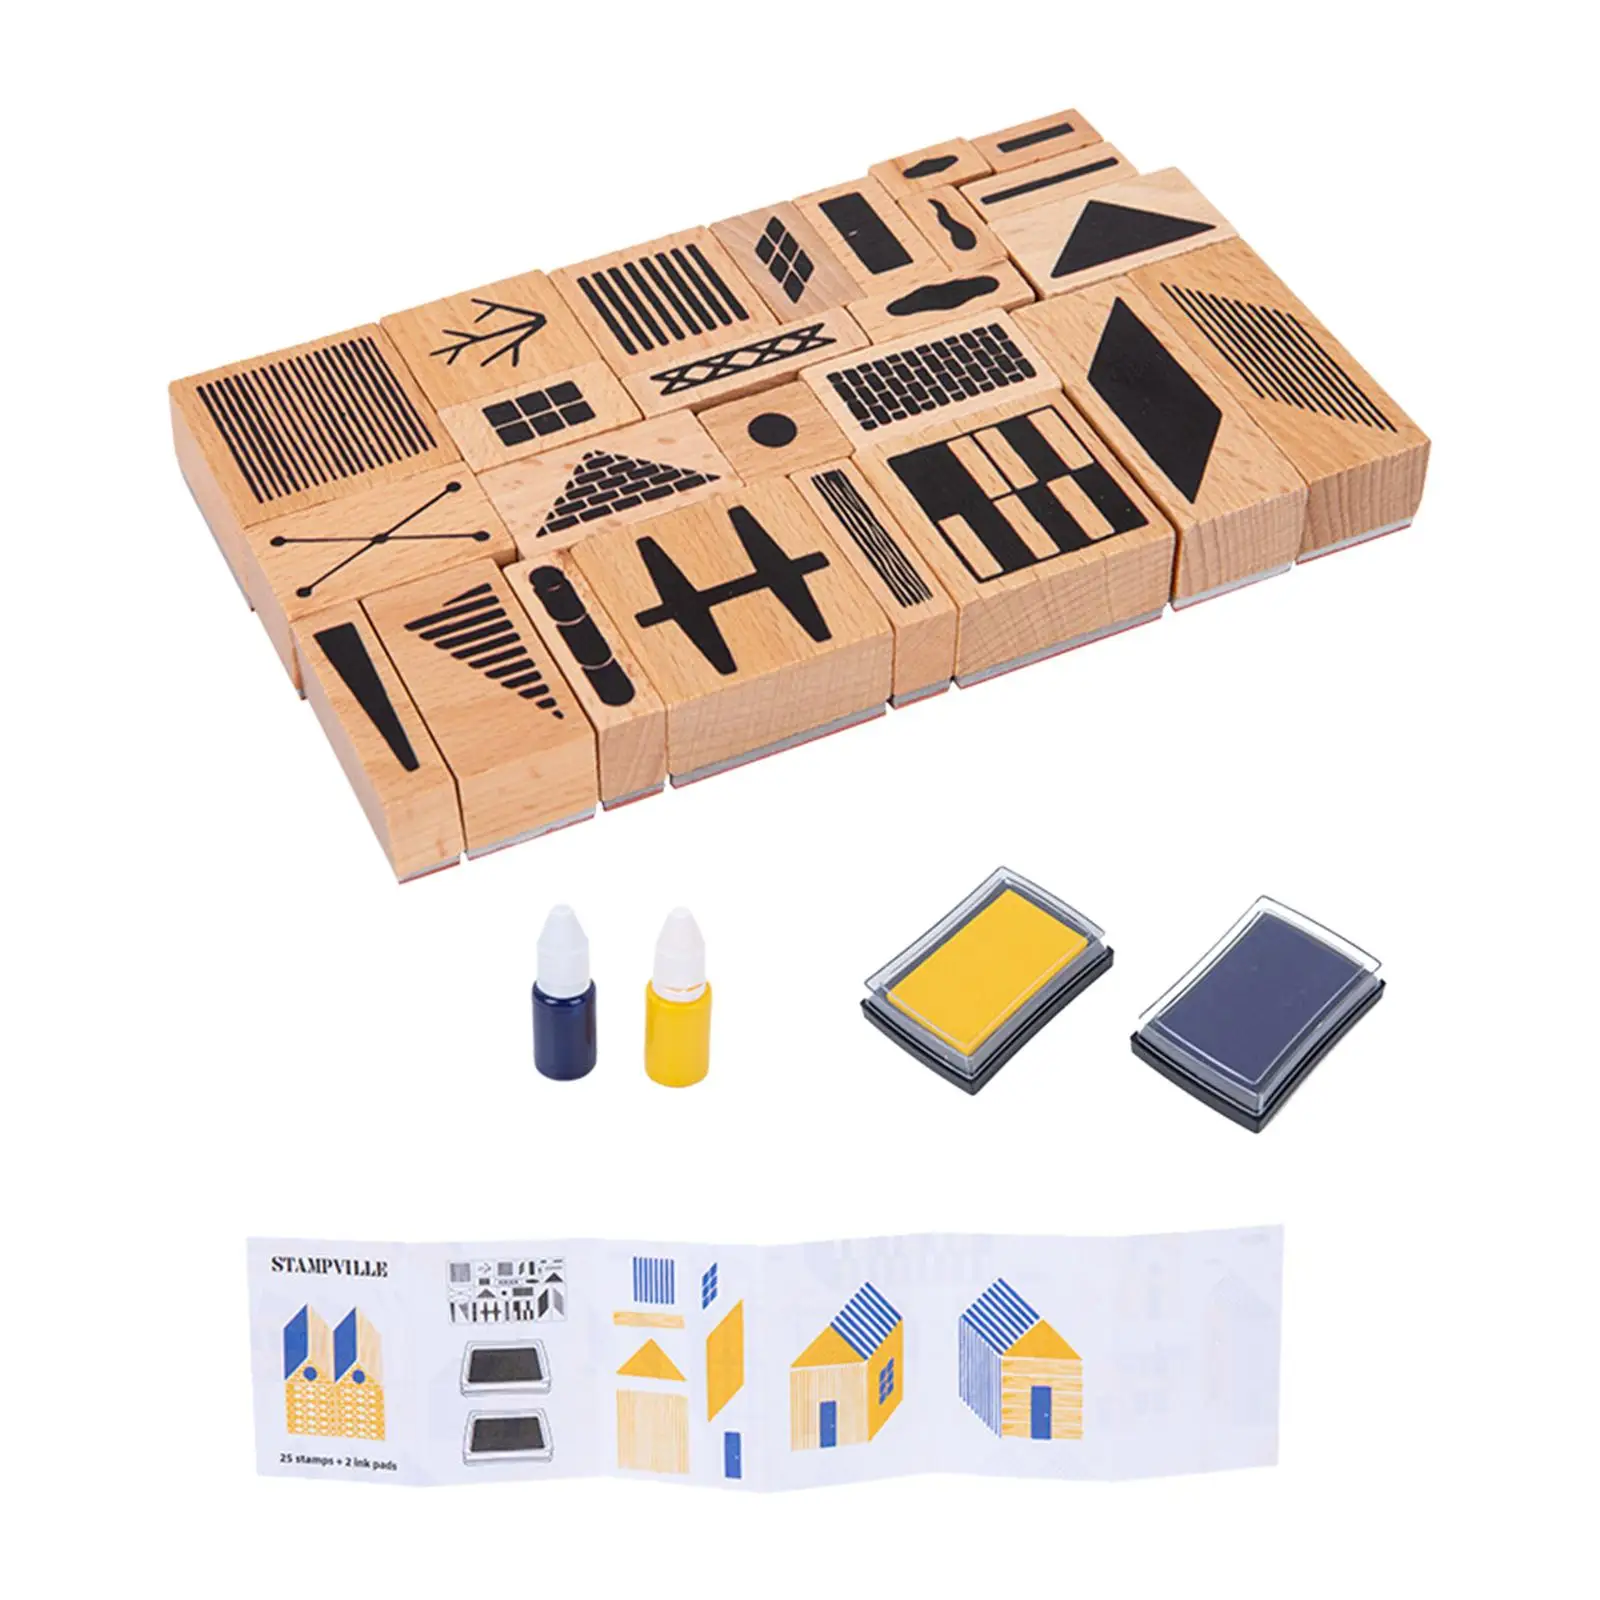 

Town Themed Wooden Stamp Set Educational Arts Crafts Sensory Toy with Ink Pad for Girls Boys Birthday Crafting Children Kids